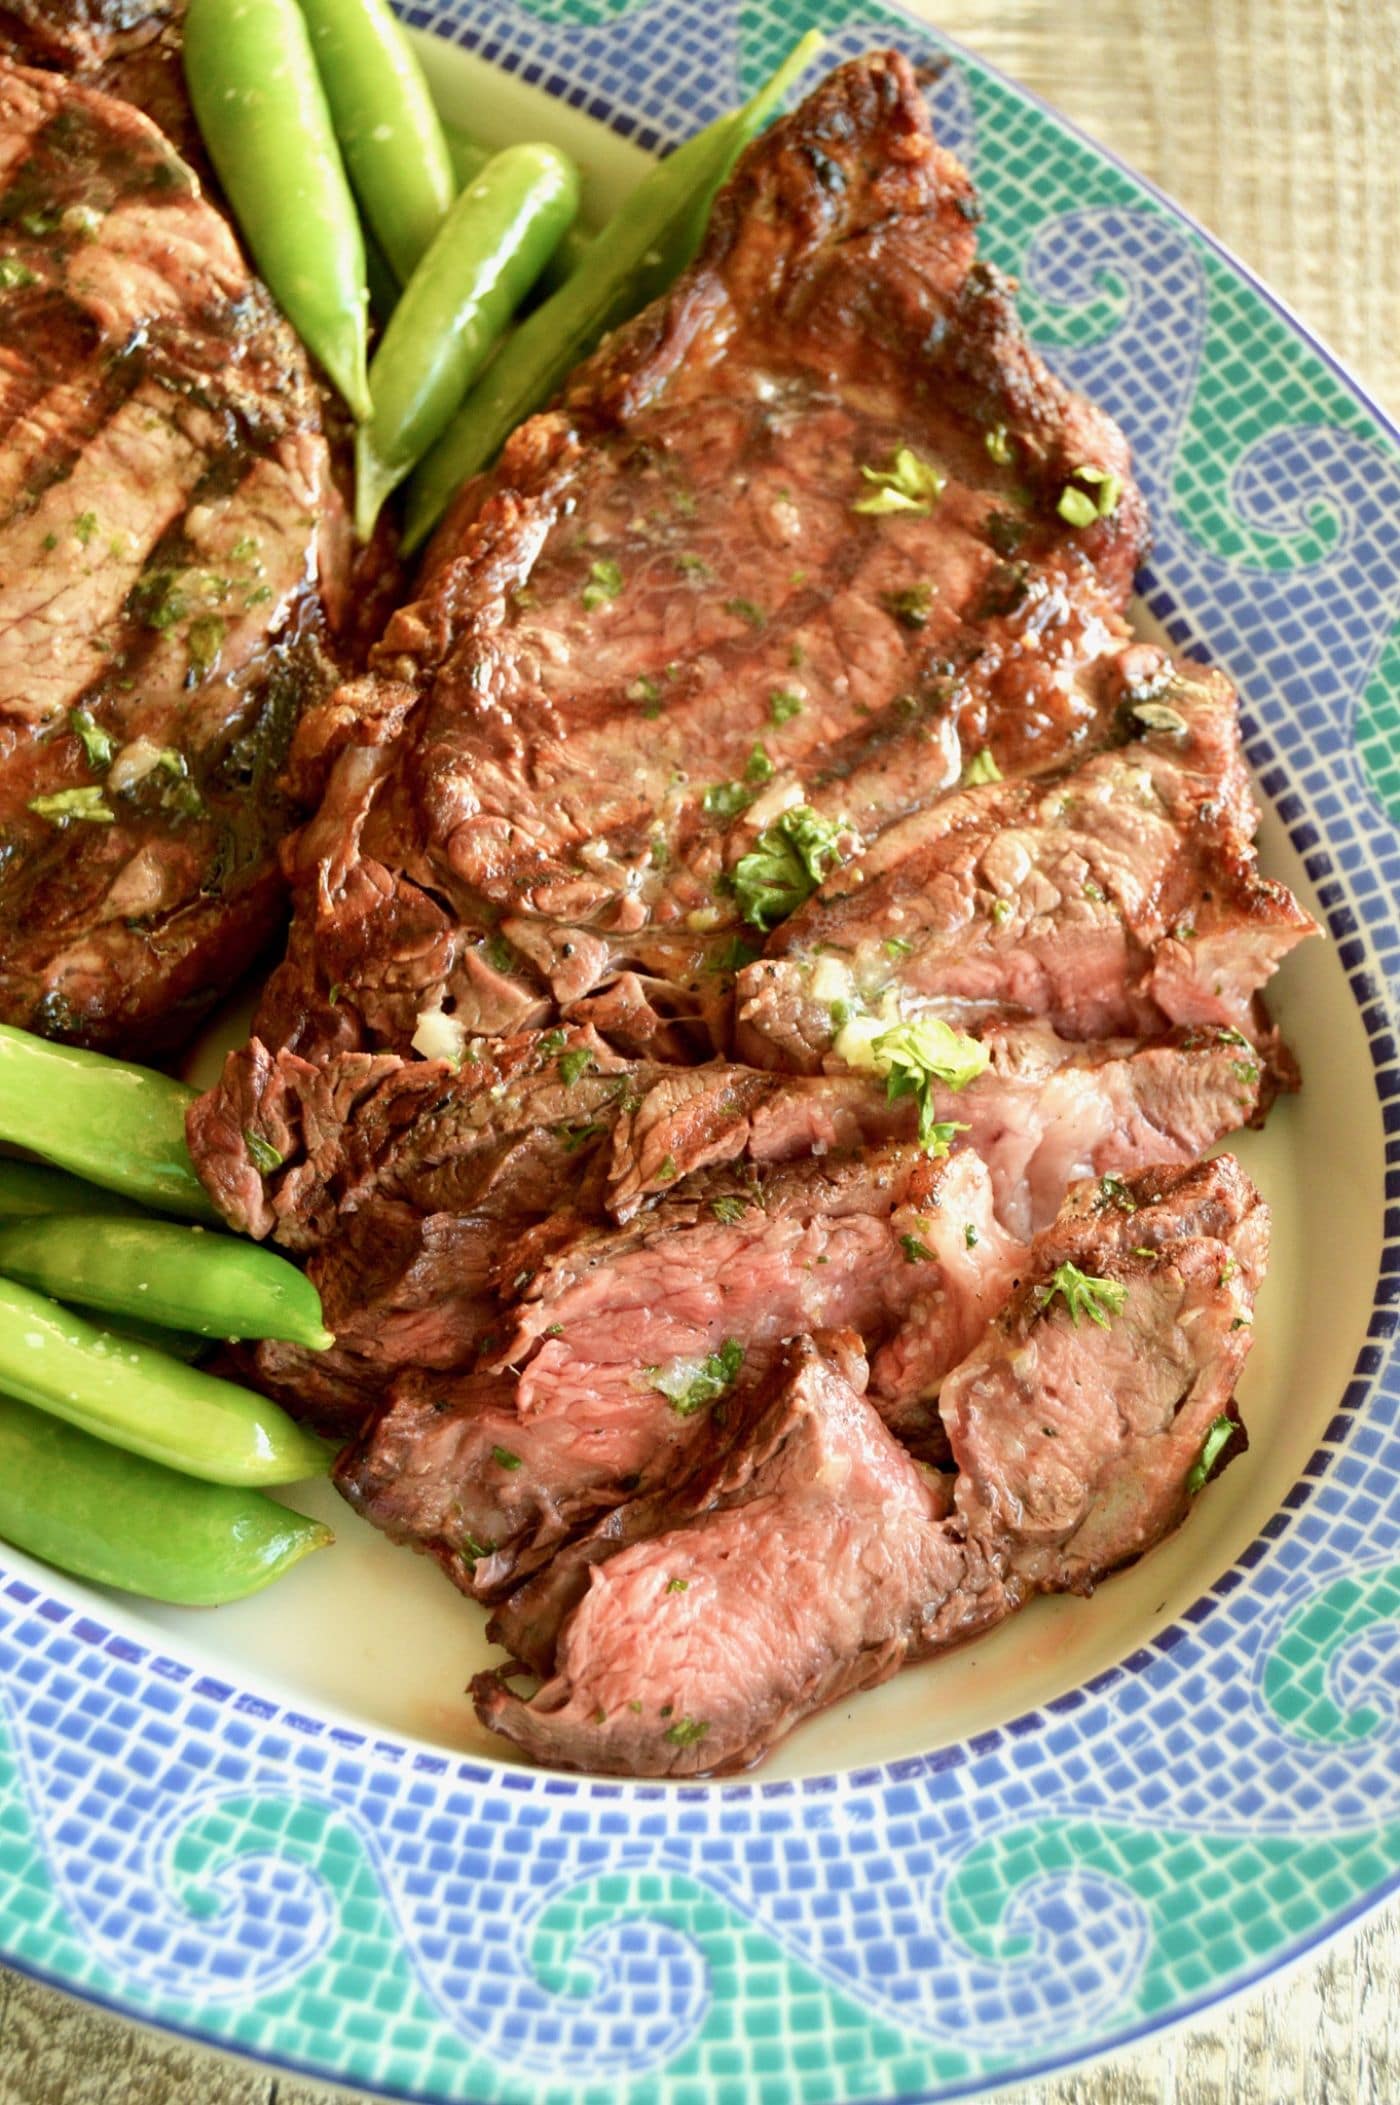 Grilled Steak with Bourbon Garlic Butter-- How to grill the perfect steak: Melted Bourbon Garlic butter blankets seared on the outside, juicy, tender on the inside steaks for an easy BBQ meal for entertaining.